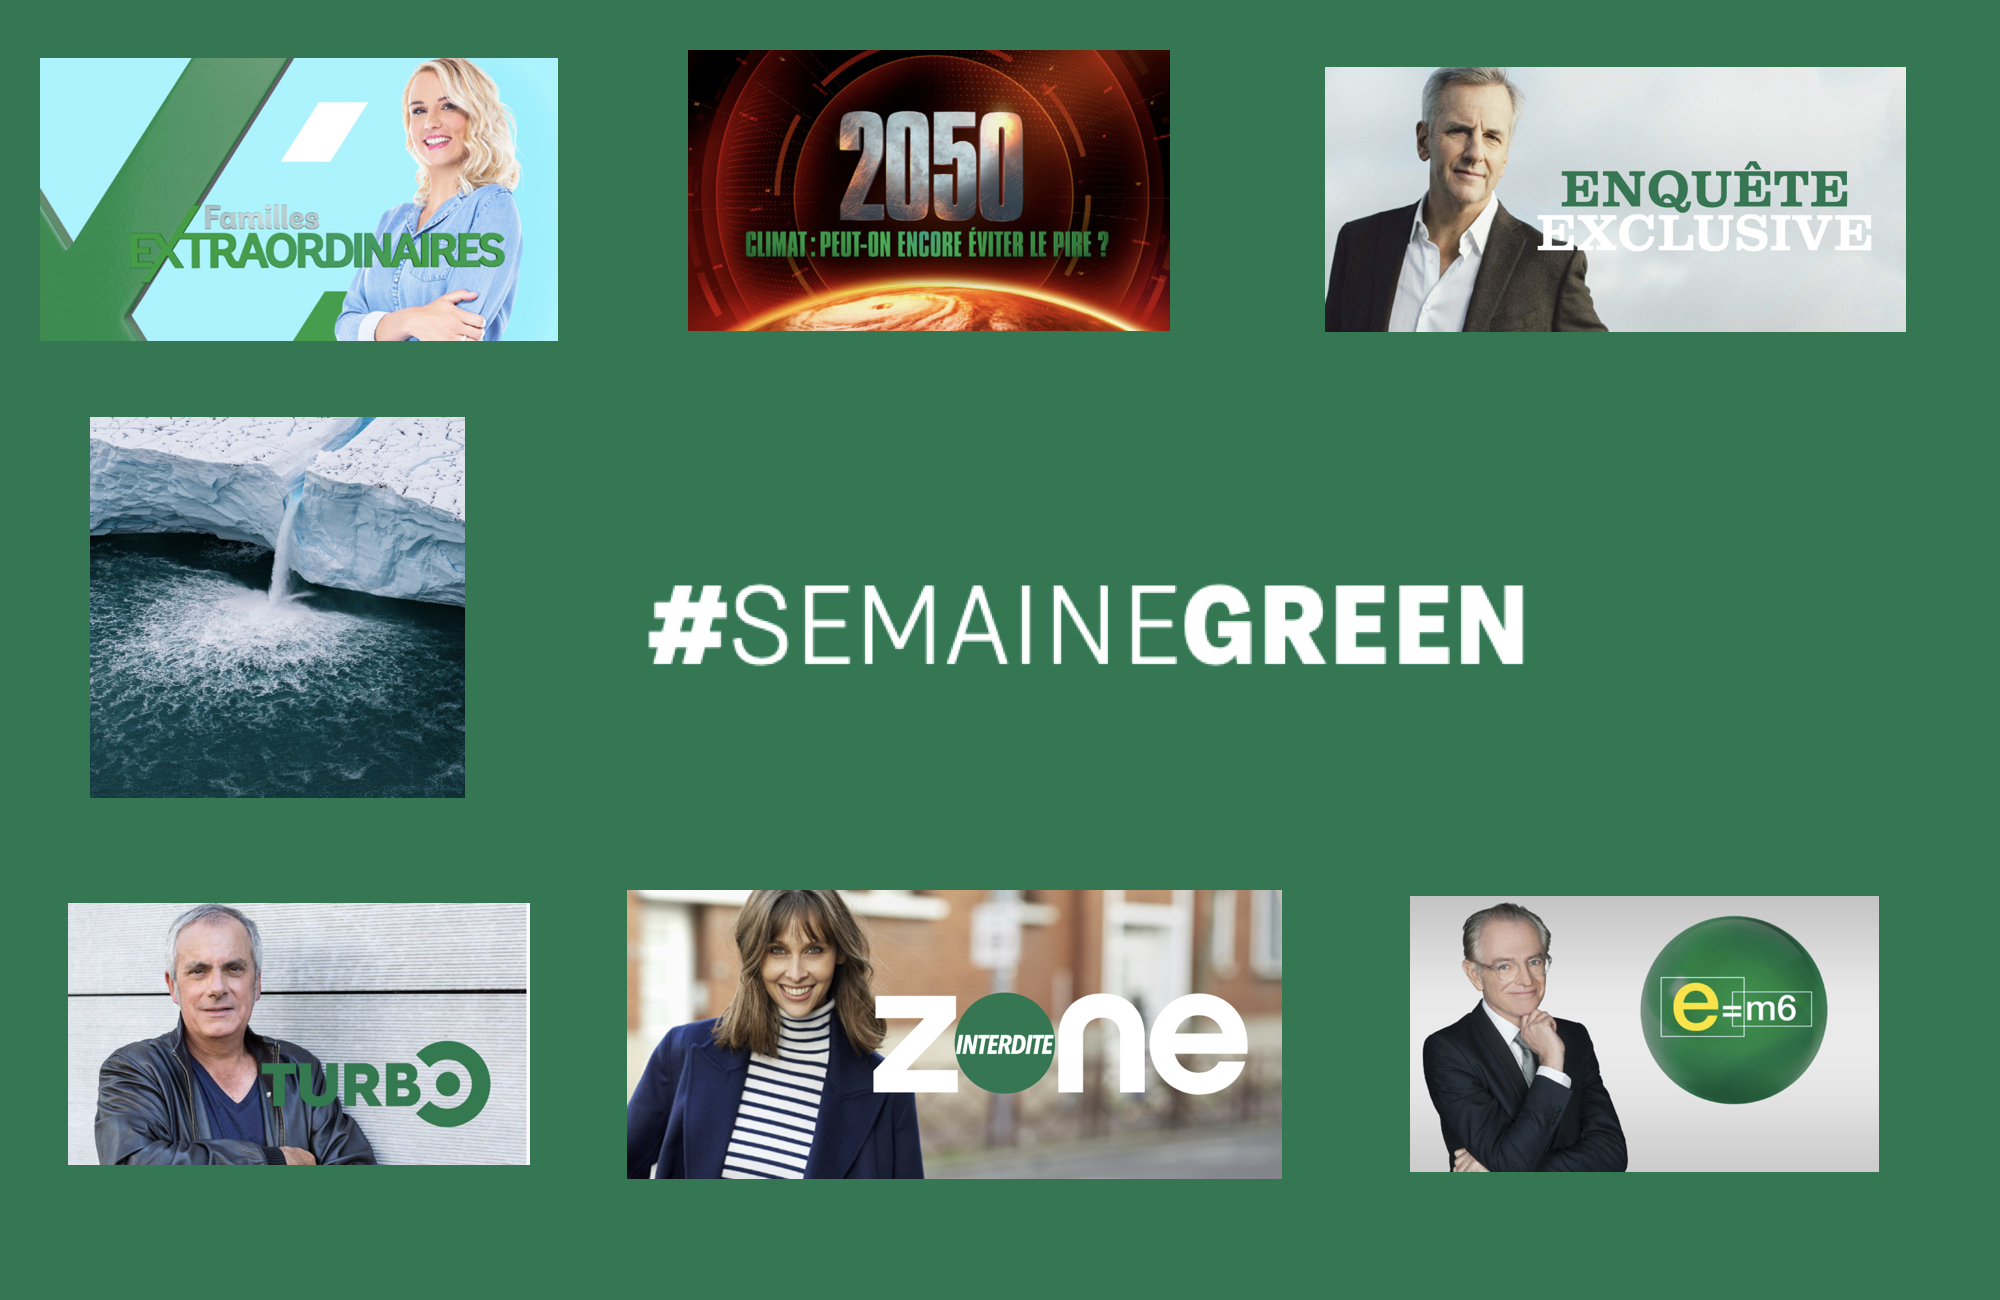 Semaine green - Groupe M6 - 2021 - 